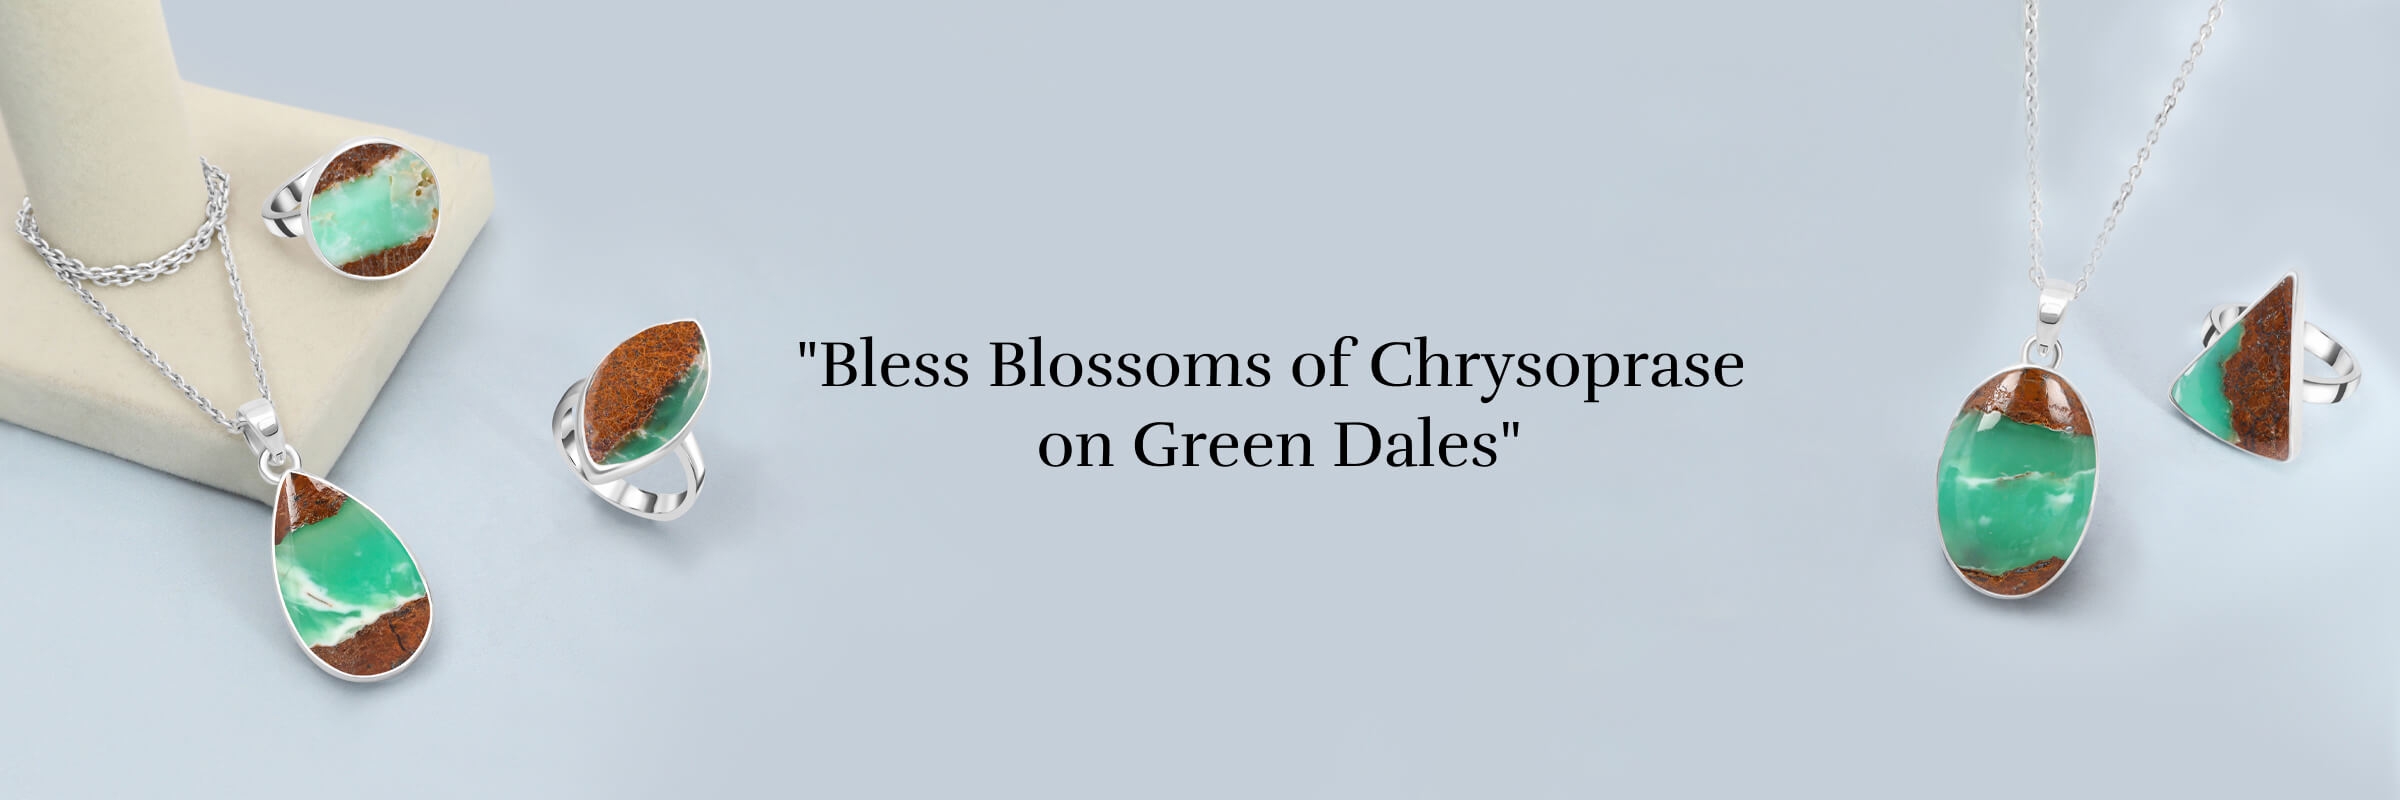 Enchanting Green Hues: Chrysoprase Jewelry for Natural Beauty 1